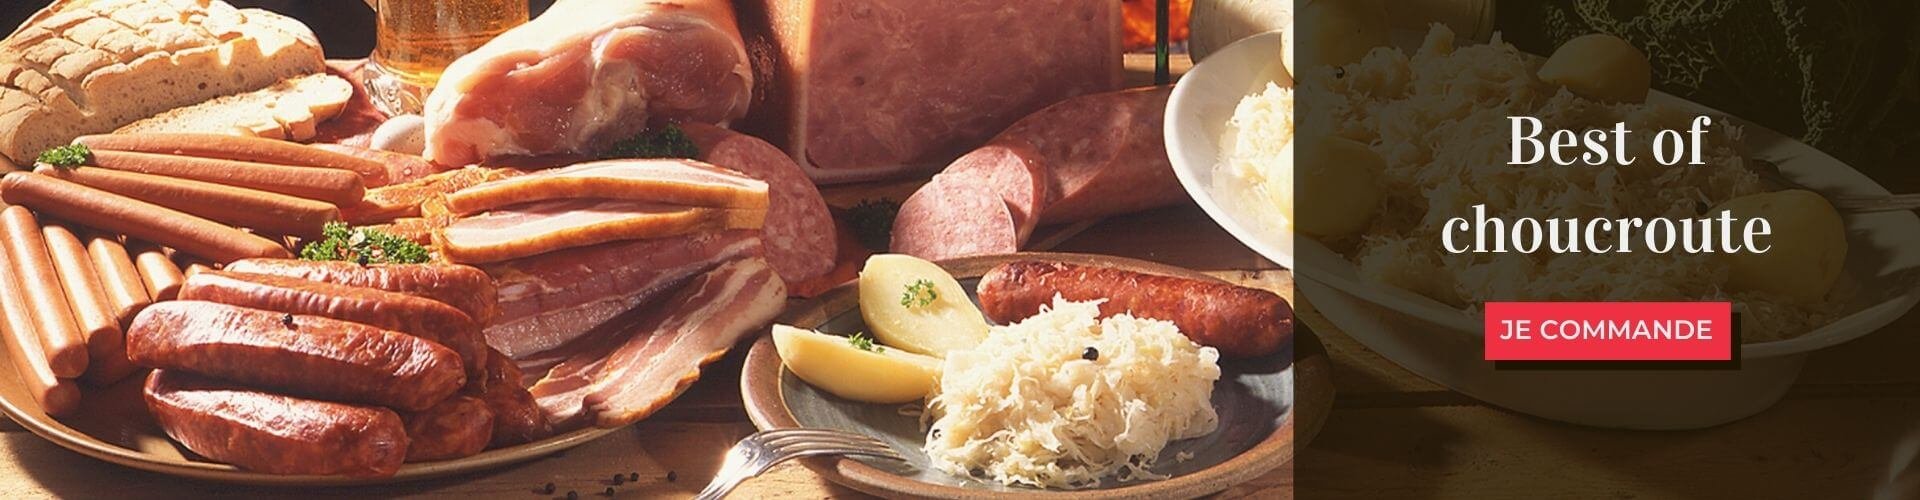 Best of choucroute